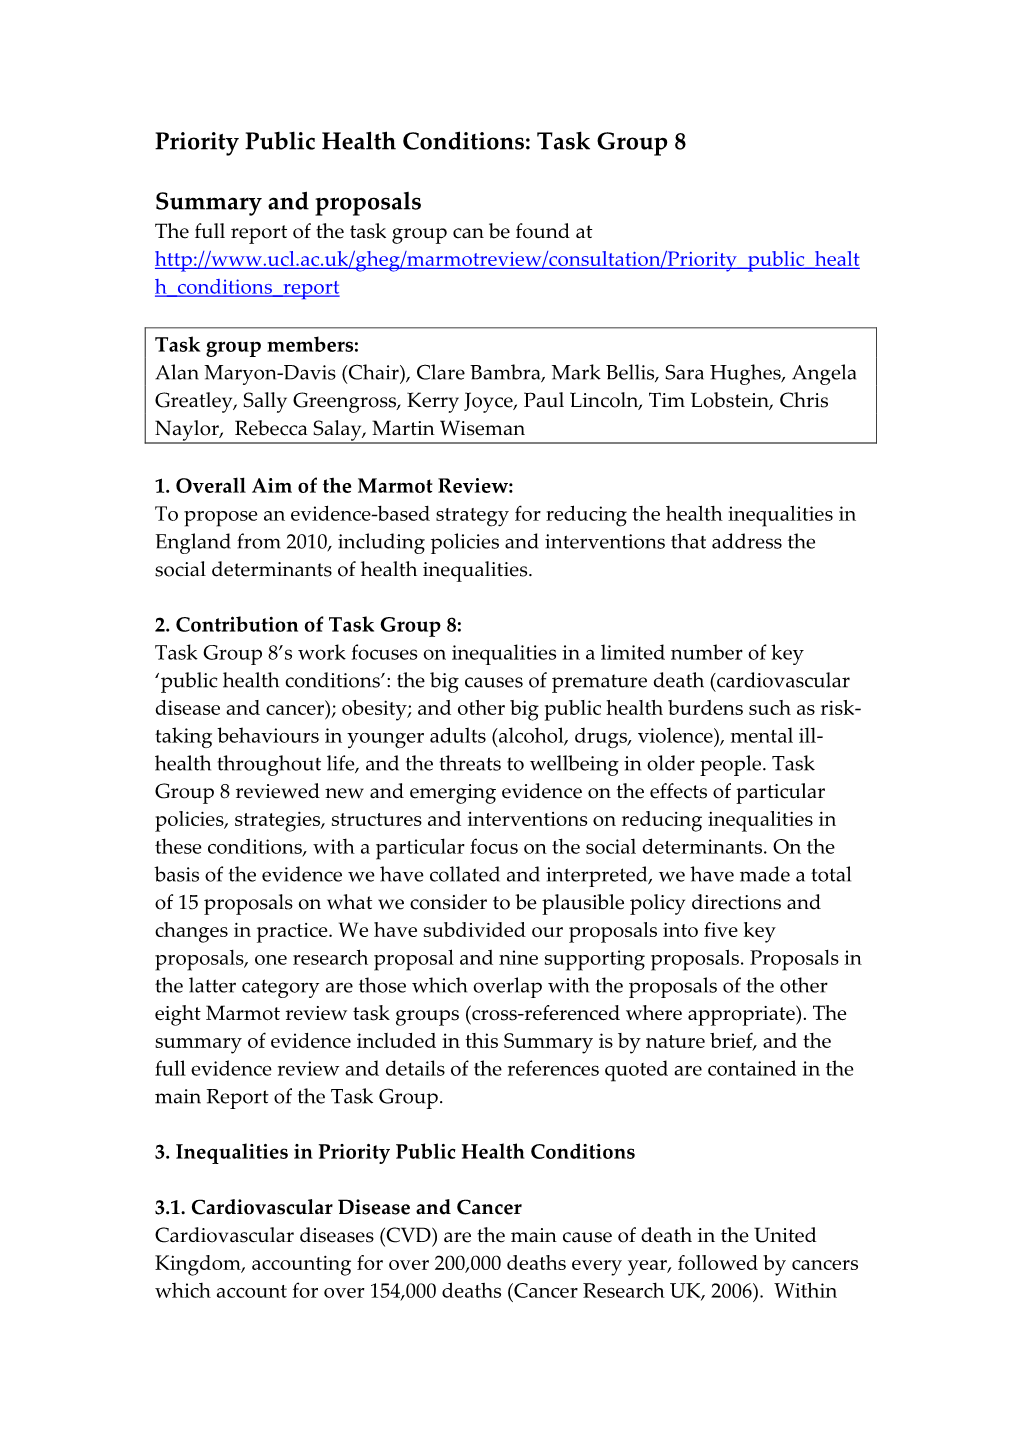 Priority Public Health Conditions: Task Group 8 Summary and Proposals